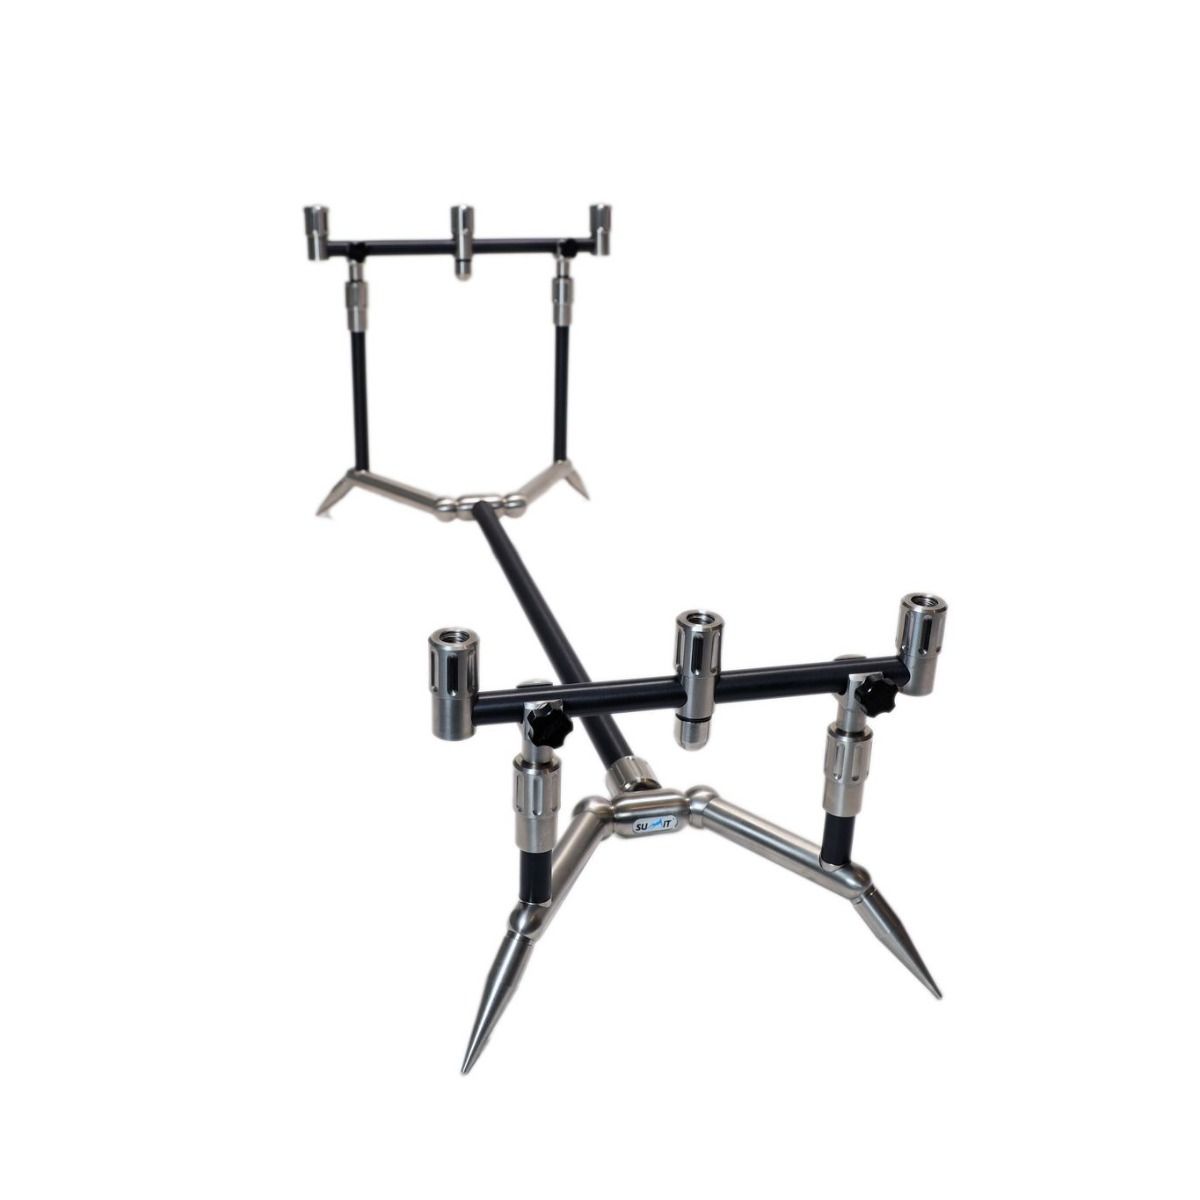 New Direction Tackle 360 Rod Pod for Carp Fishing (3 Rods) - Black for sale  online